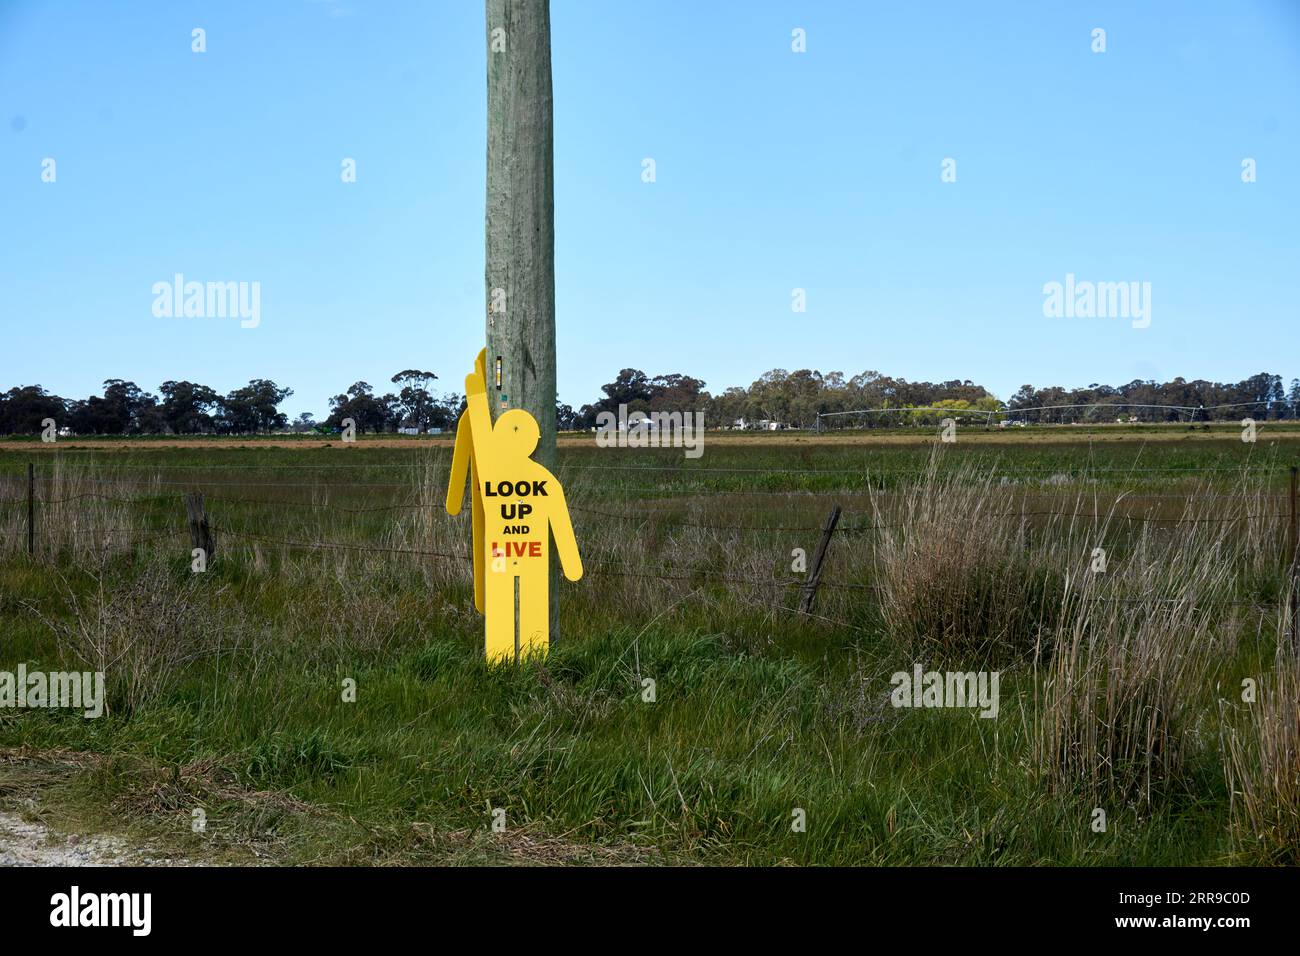 Yellow Human silhouette pointing up reminding of overhead power lines Stock Photo